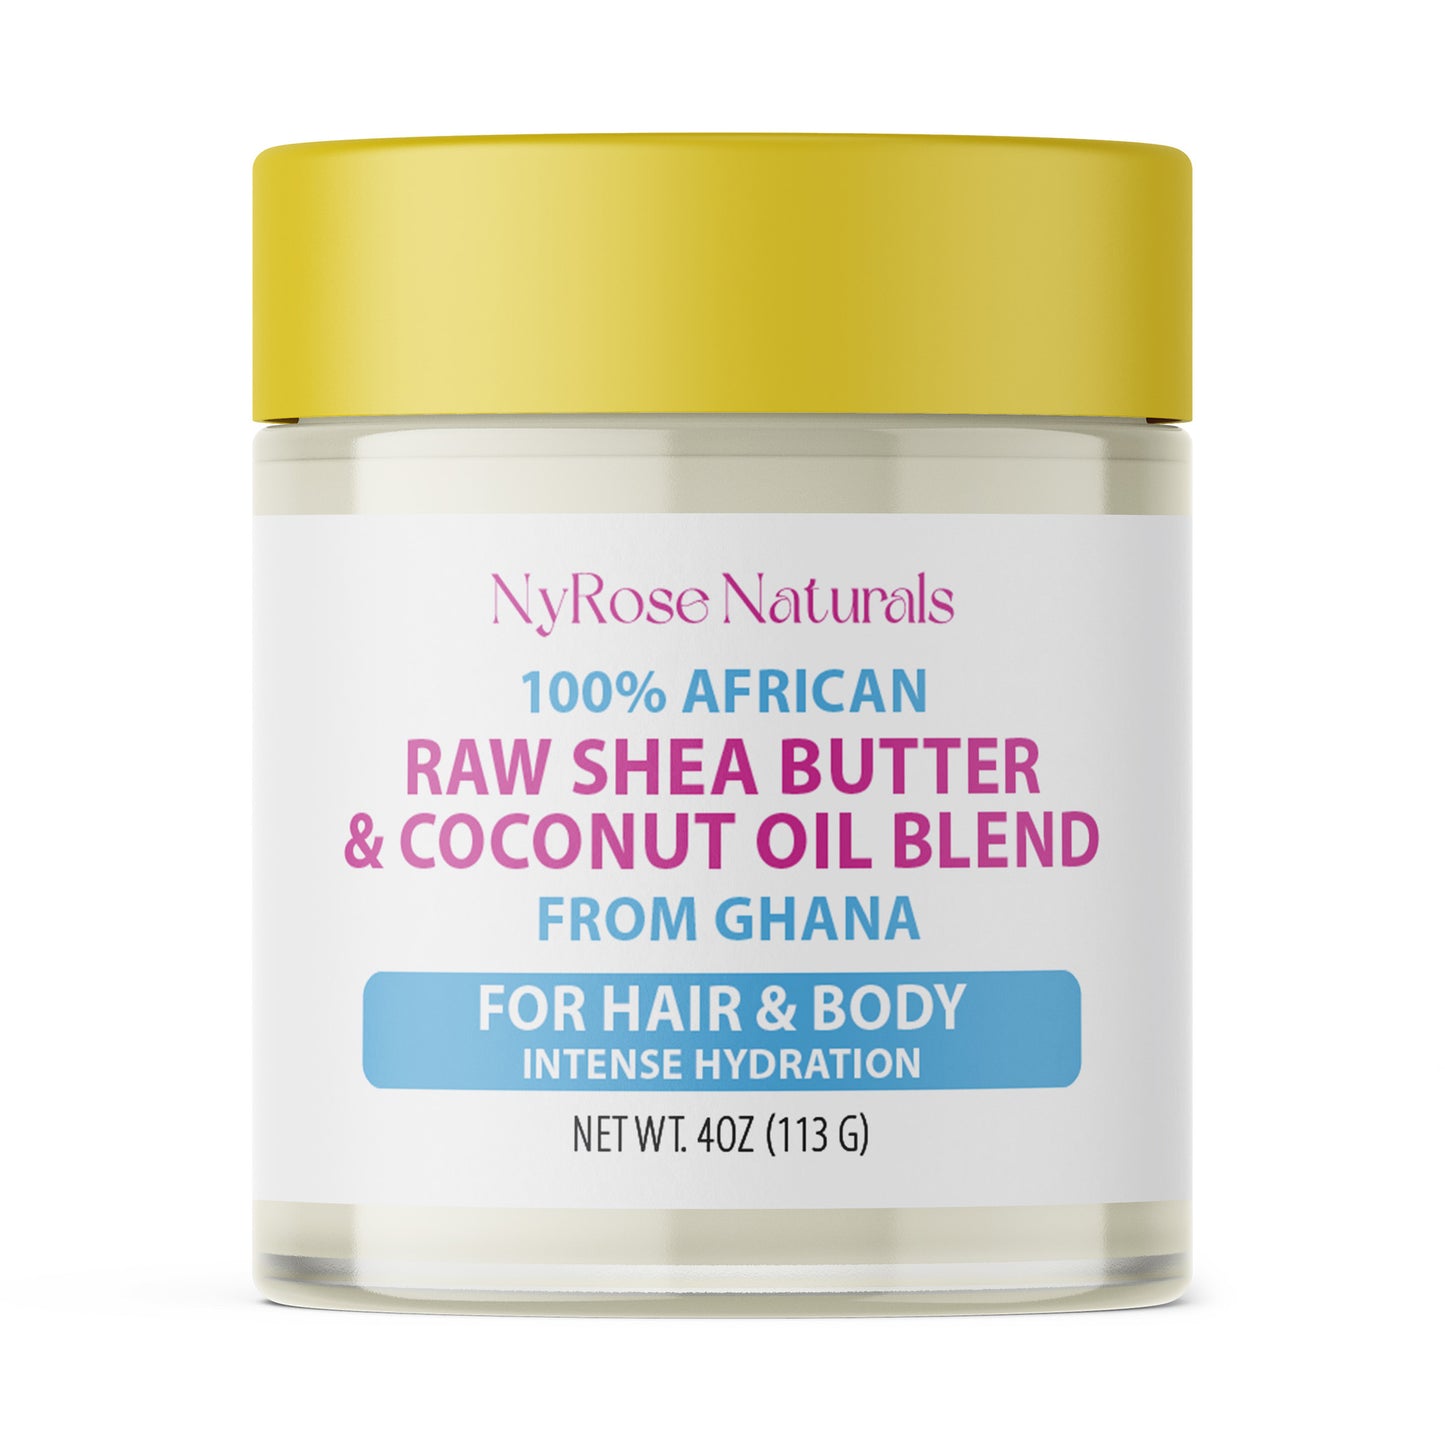 PRE-ORDER 100% African Raw Shea Butter & Coconut Oil Blend from Ghana - NyRose Naturals